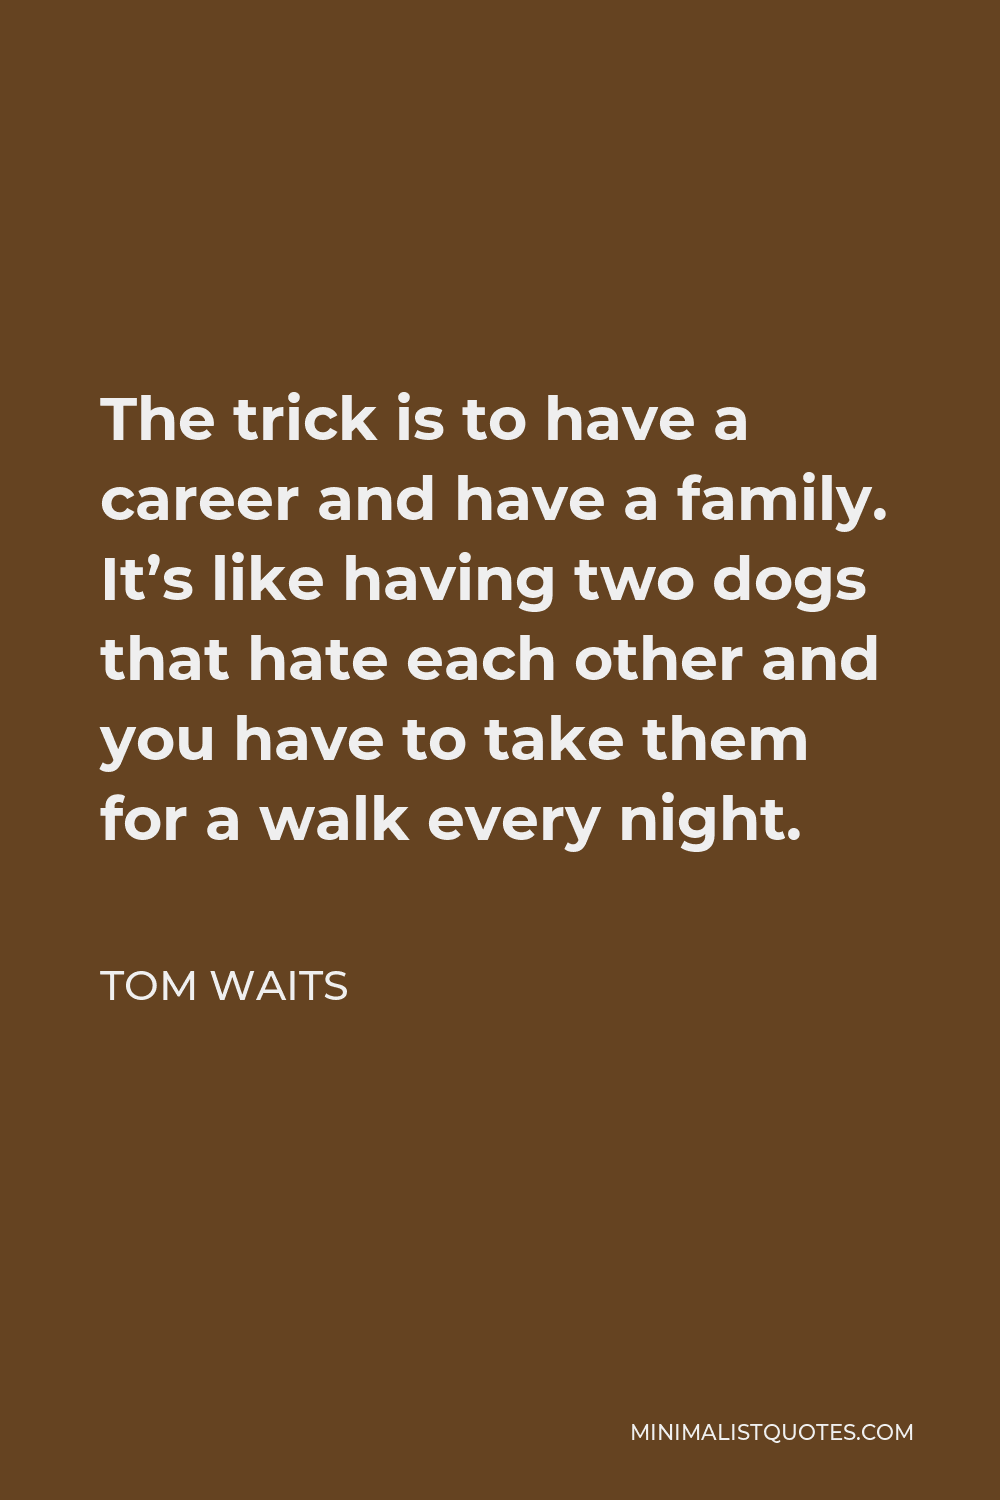 Tom Waits Quote - The trick is to have a career and have a family. It’s like having two dogs that hate each other and you have to take them for a walk every night.